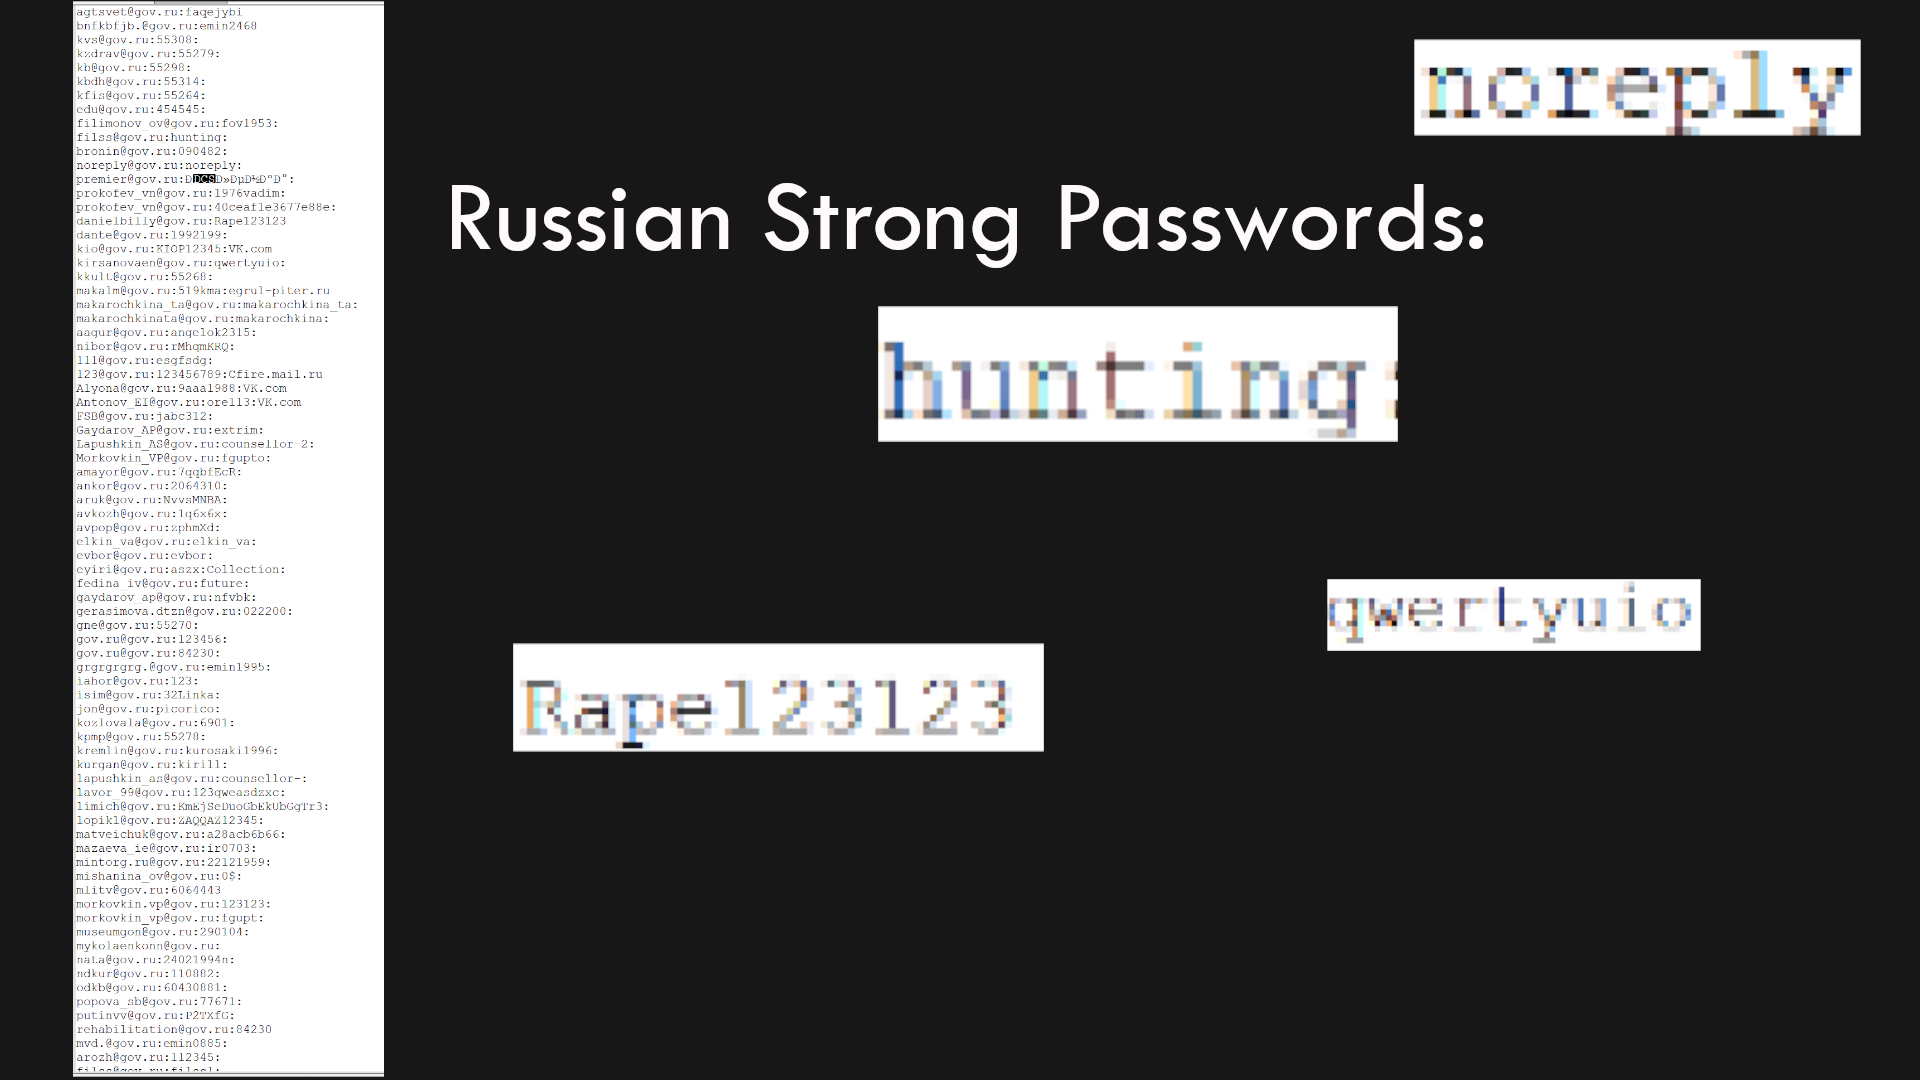 ./images/russian-passwords.png